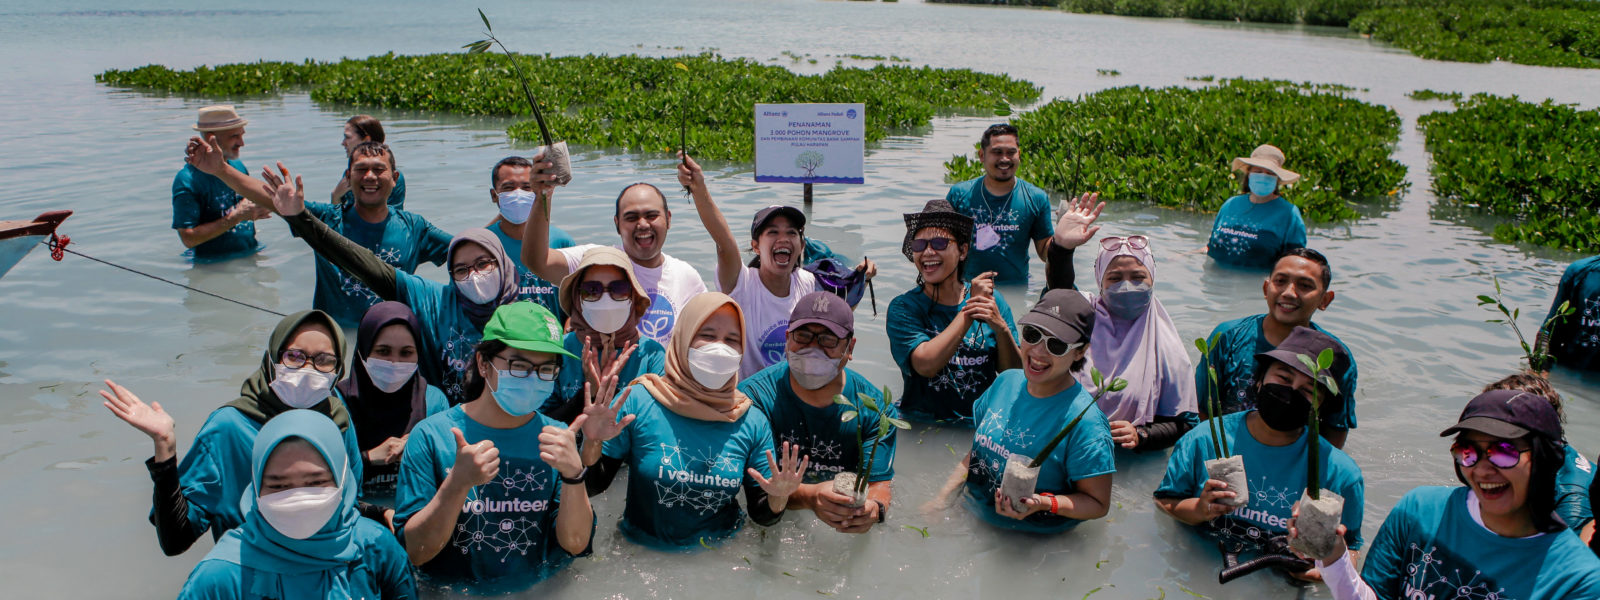 Allianz Indonesia Joined Pulau Harapan Trip to Plant 3,000 Mangroves